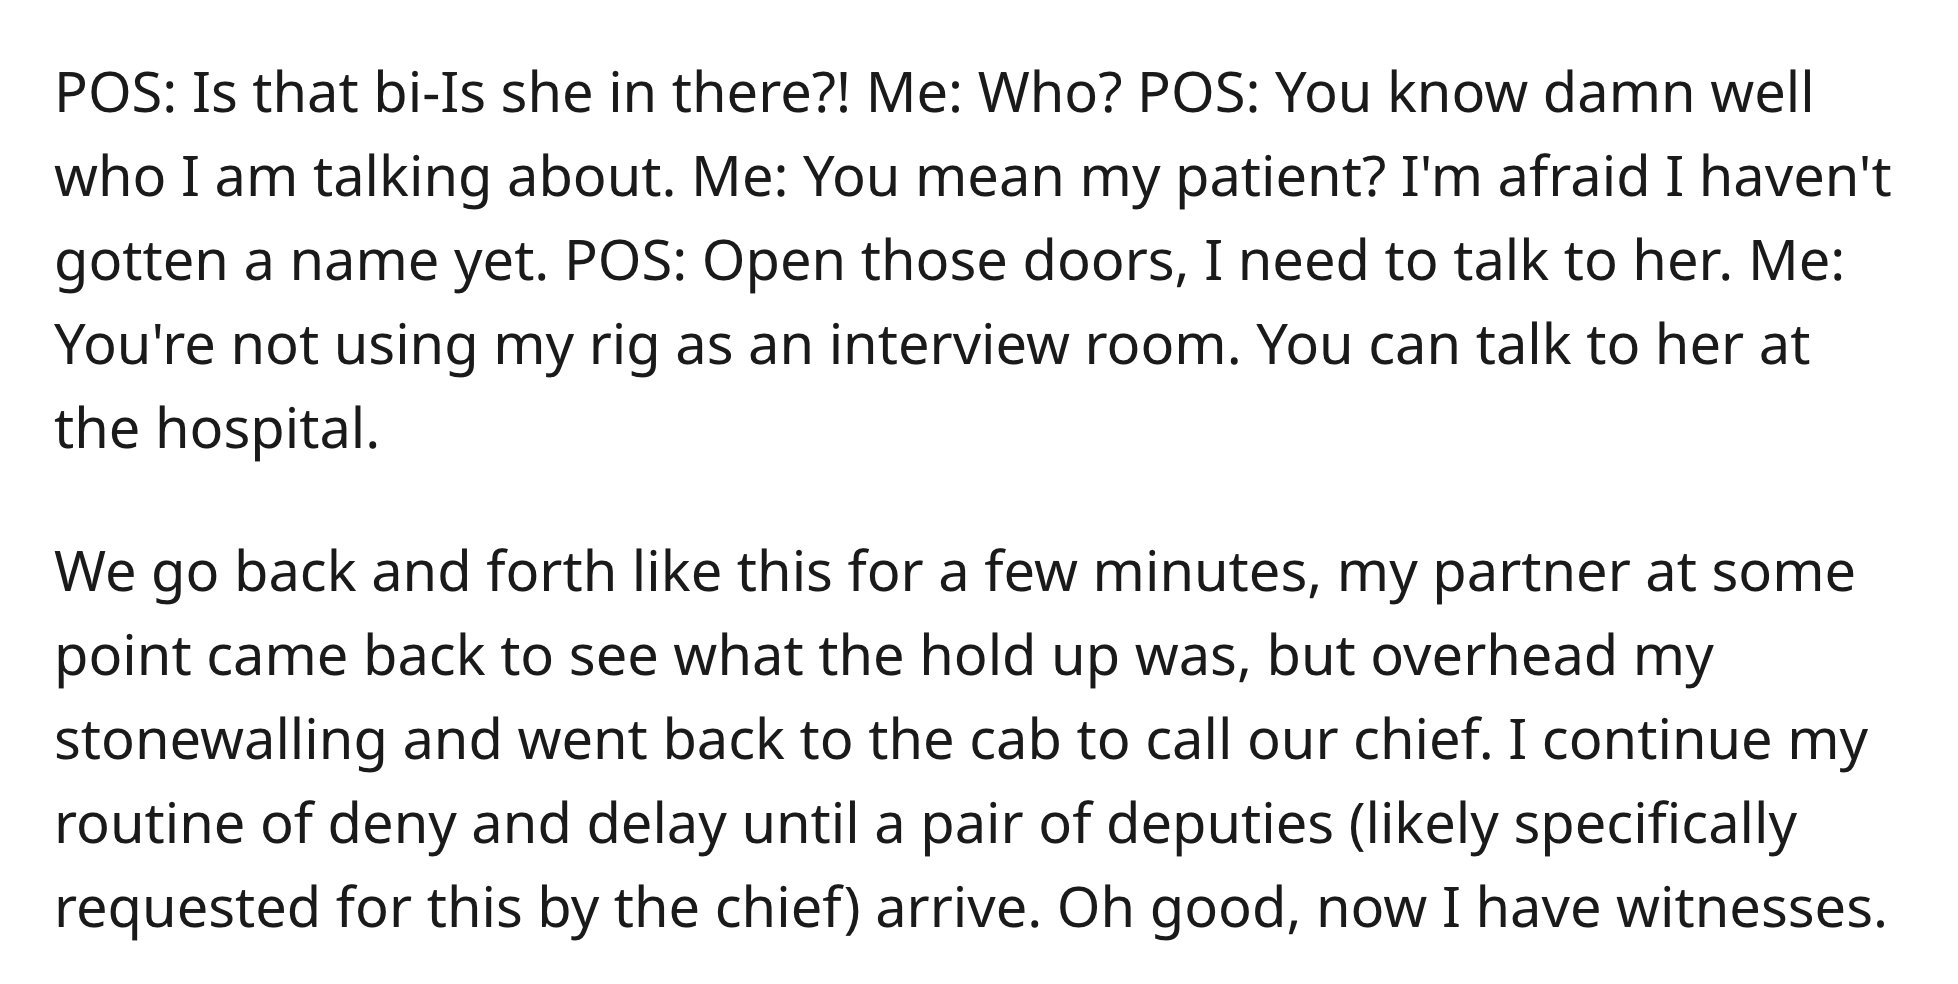 EMT Blocks Cop - Pos Is that biIs she in there?! Me Who? Pos You know damn well who I am talking about. Me You mean my patient? I'm afraid I haven't gotten a name yet. Pos Open those doors, I need to talk to her. Me You're not using my rig as an interview